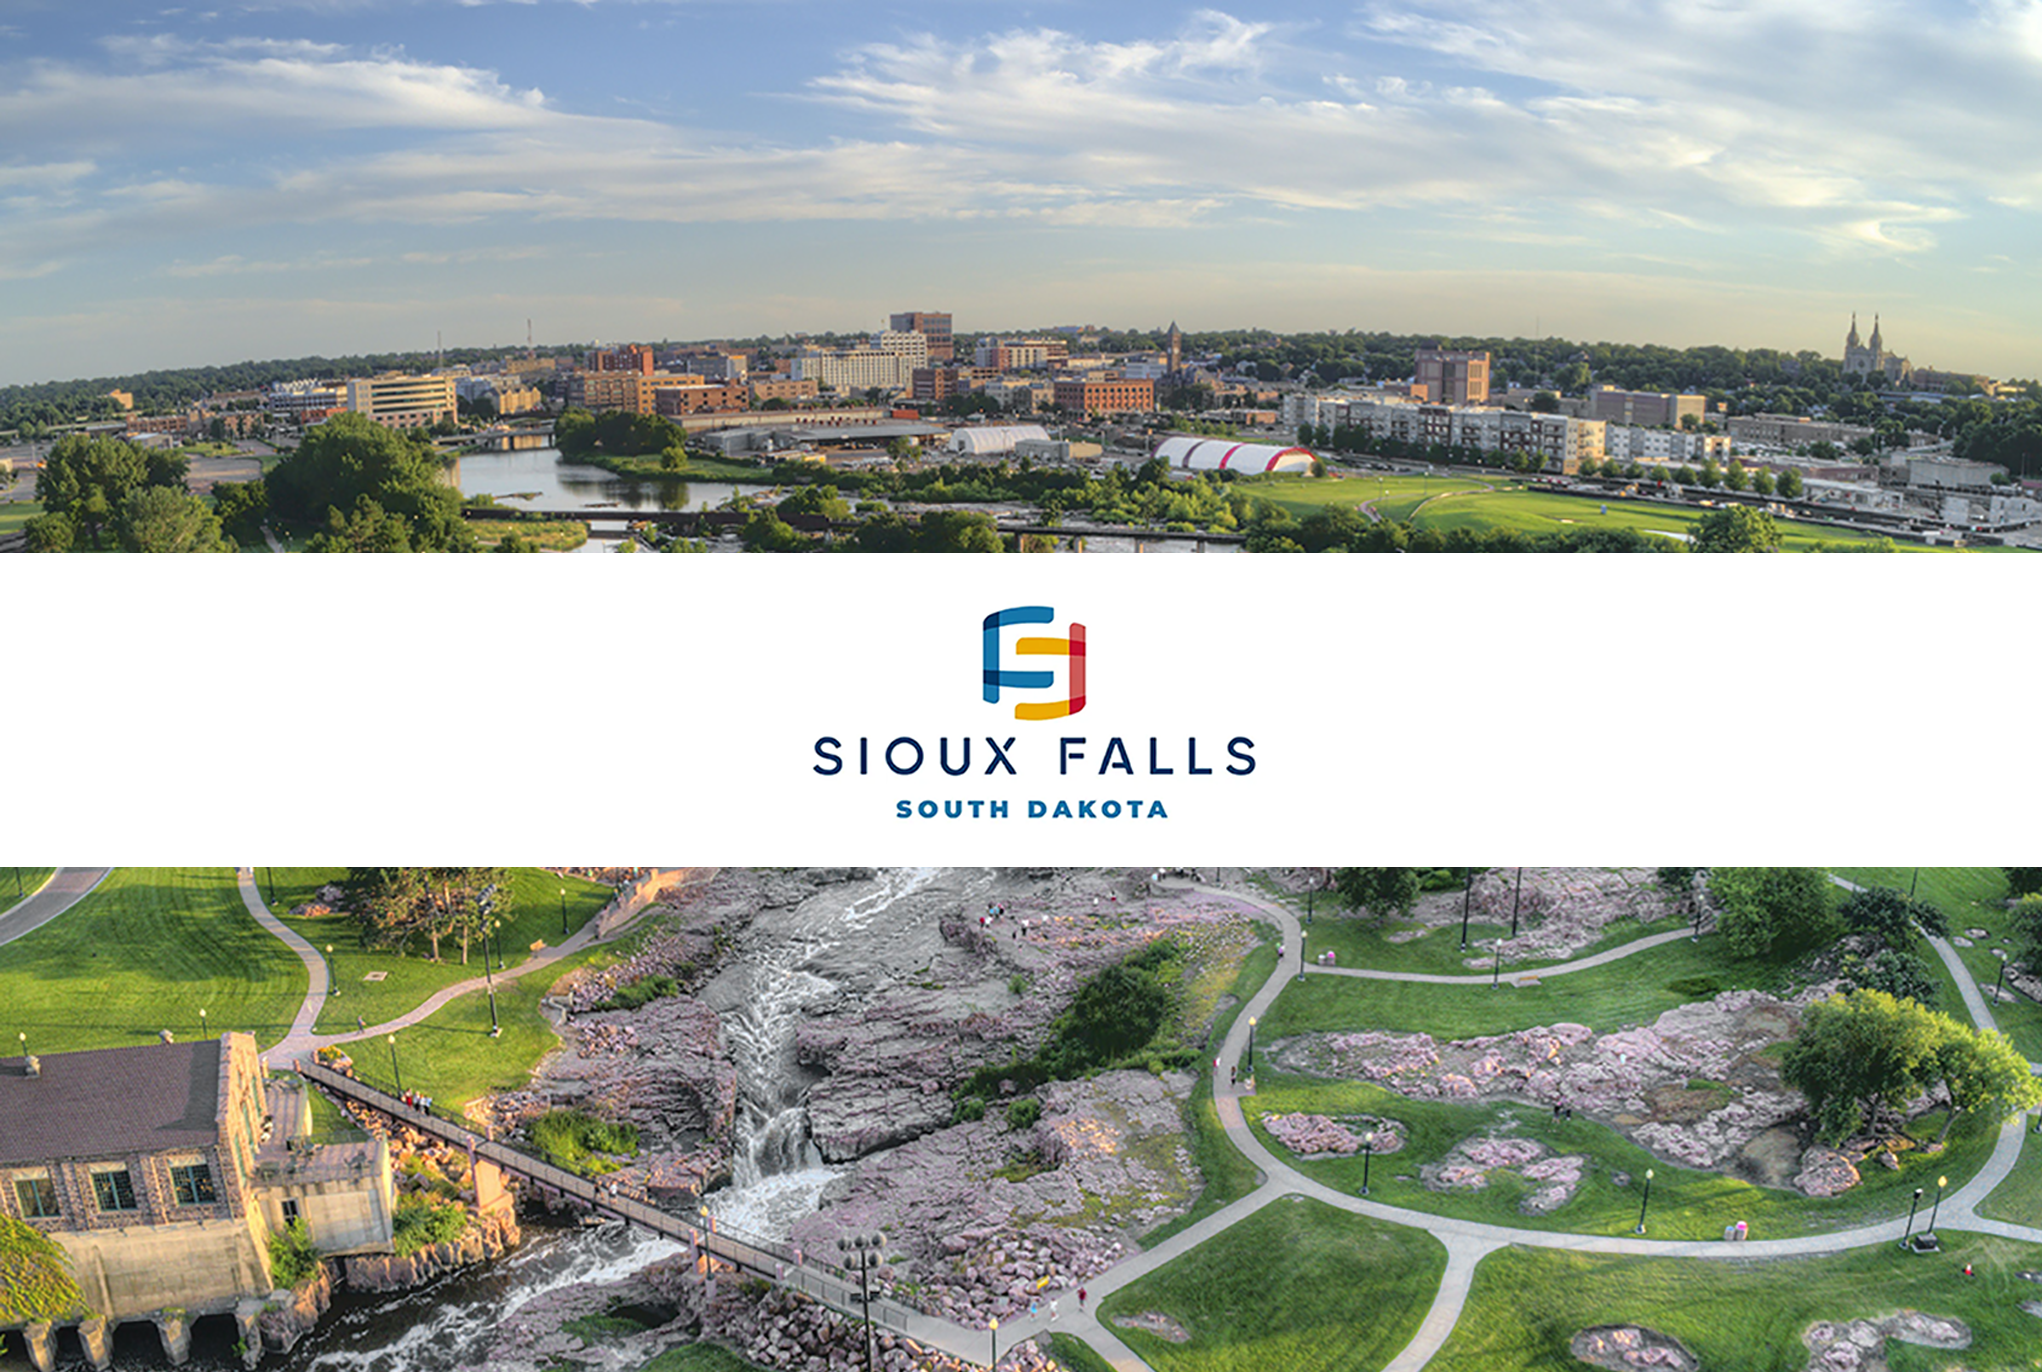 City of Sioux Falls